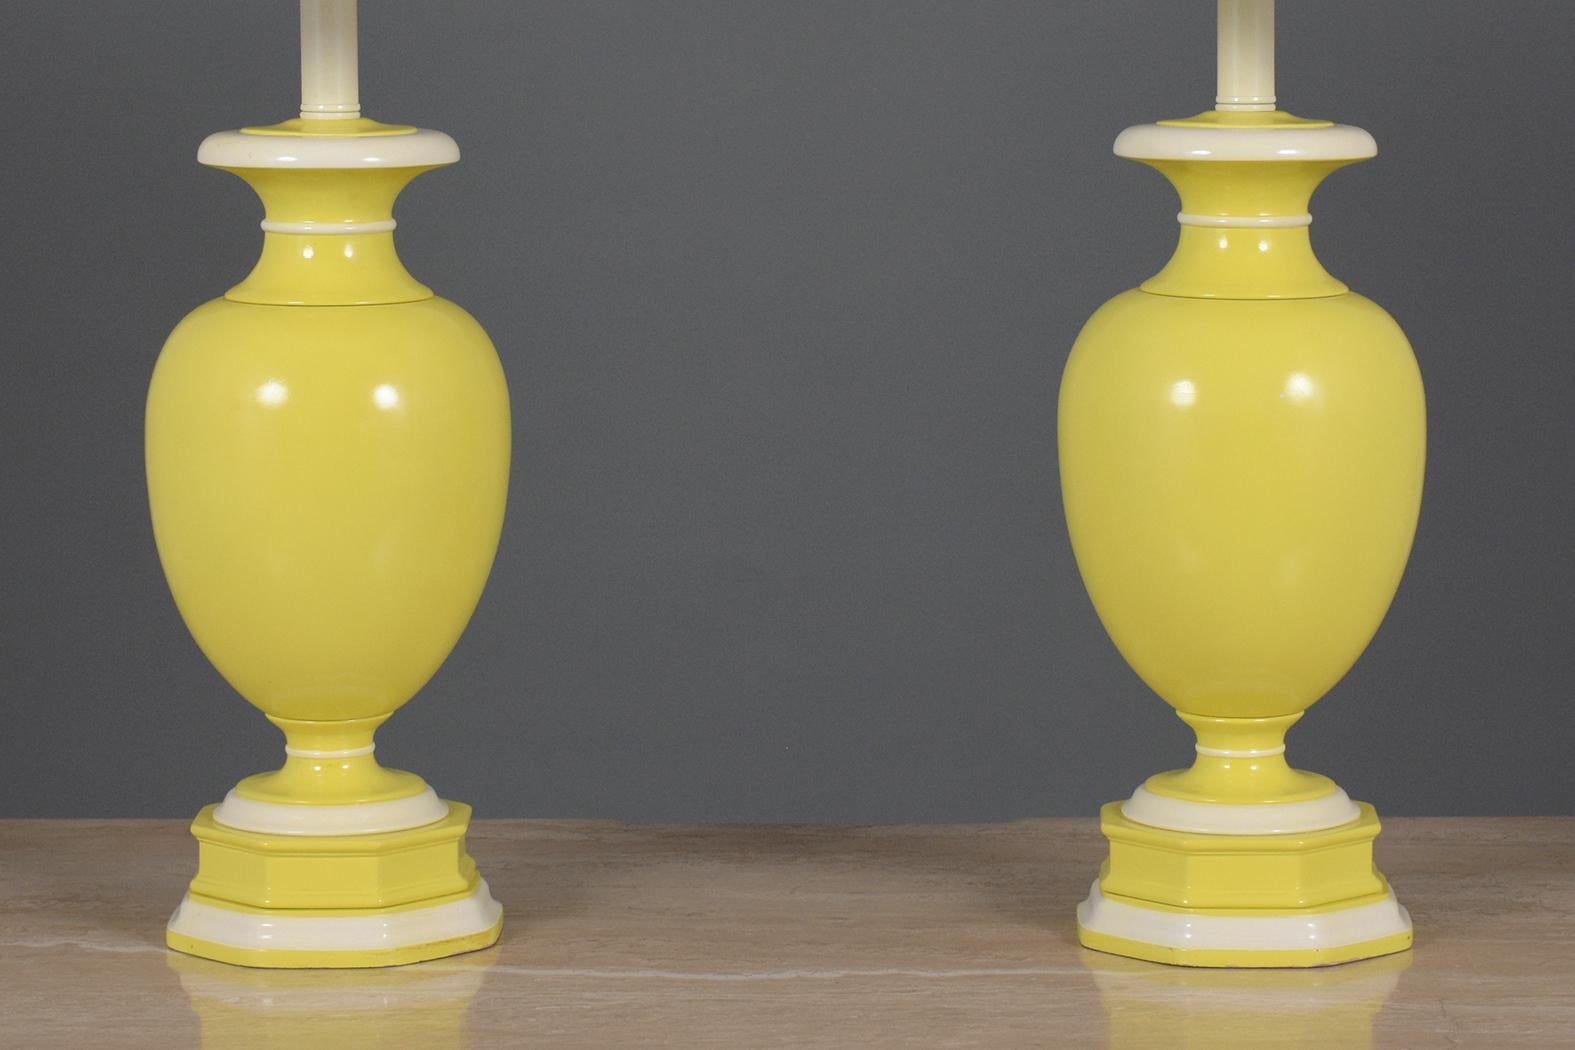 Polished Neoclassical Yellow & White Ceramic Table Lamps with New White Shades For Sale